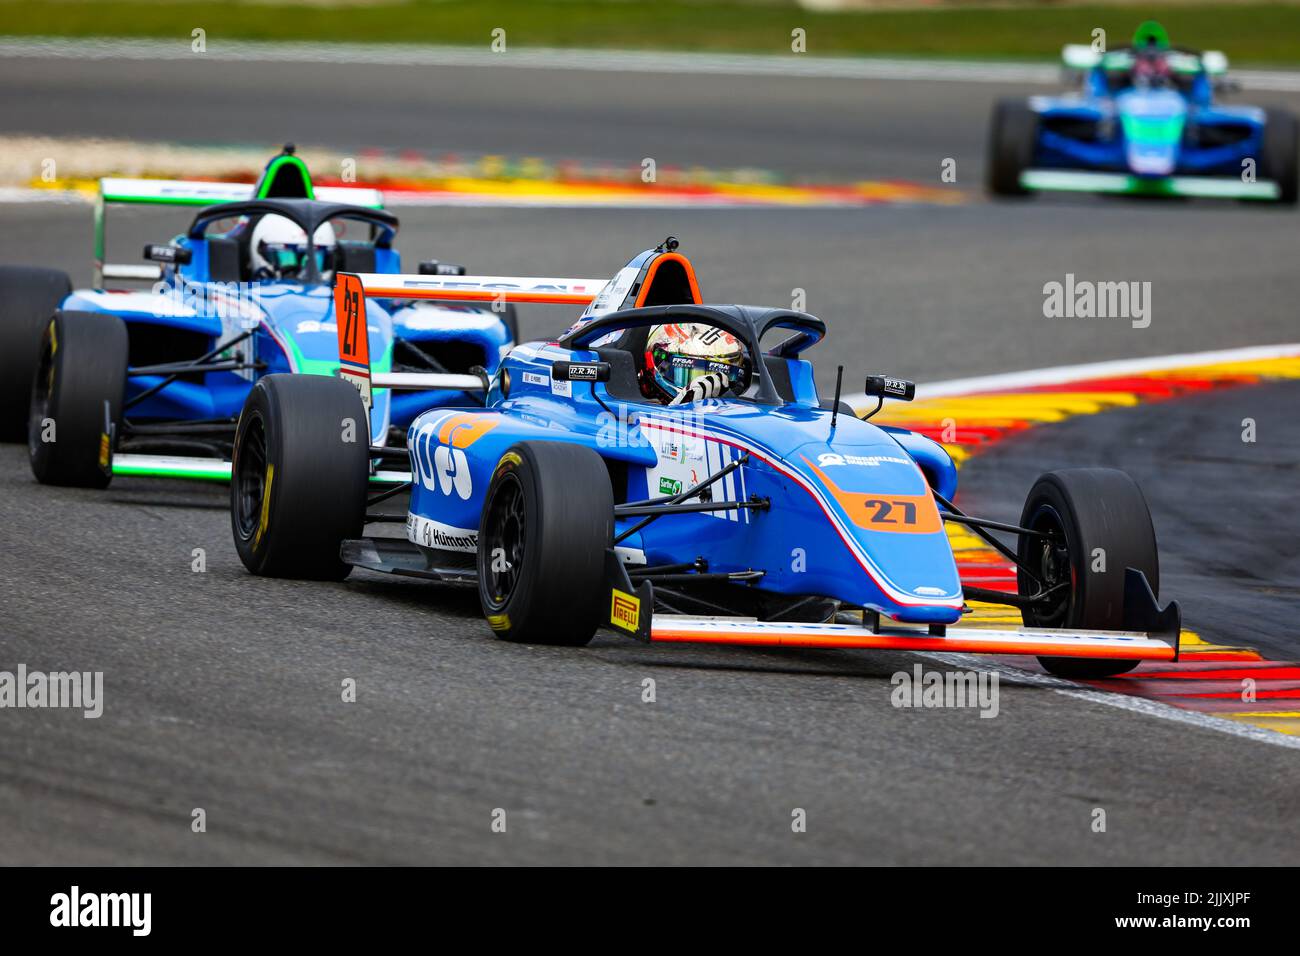 27 PIERRE Edgar (fra), Formule 4 - Mygale Genération 2, action during the 4rd round of the Championnat de France FFSA F4 2022, from July 28 to 30 on the Circuit de Spa-Francorchamps in Francorchamps, Belgium - Photo Florent Gooden / DPPI Stock Photo